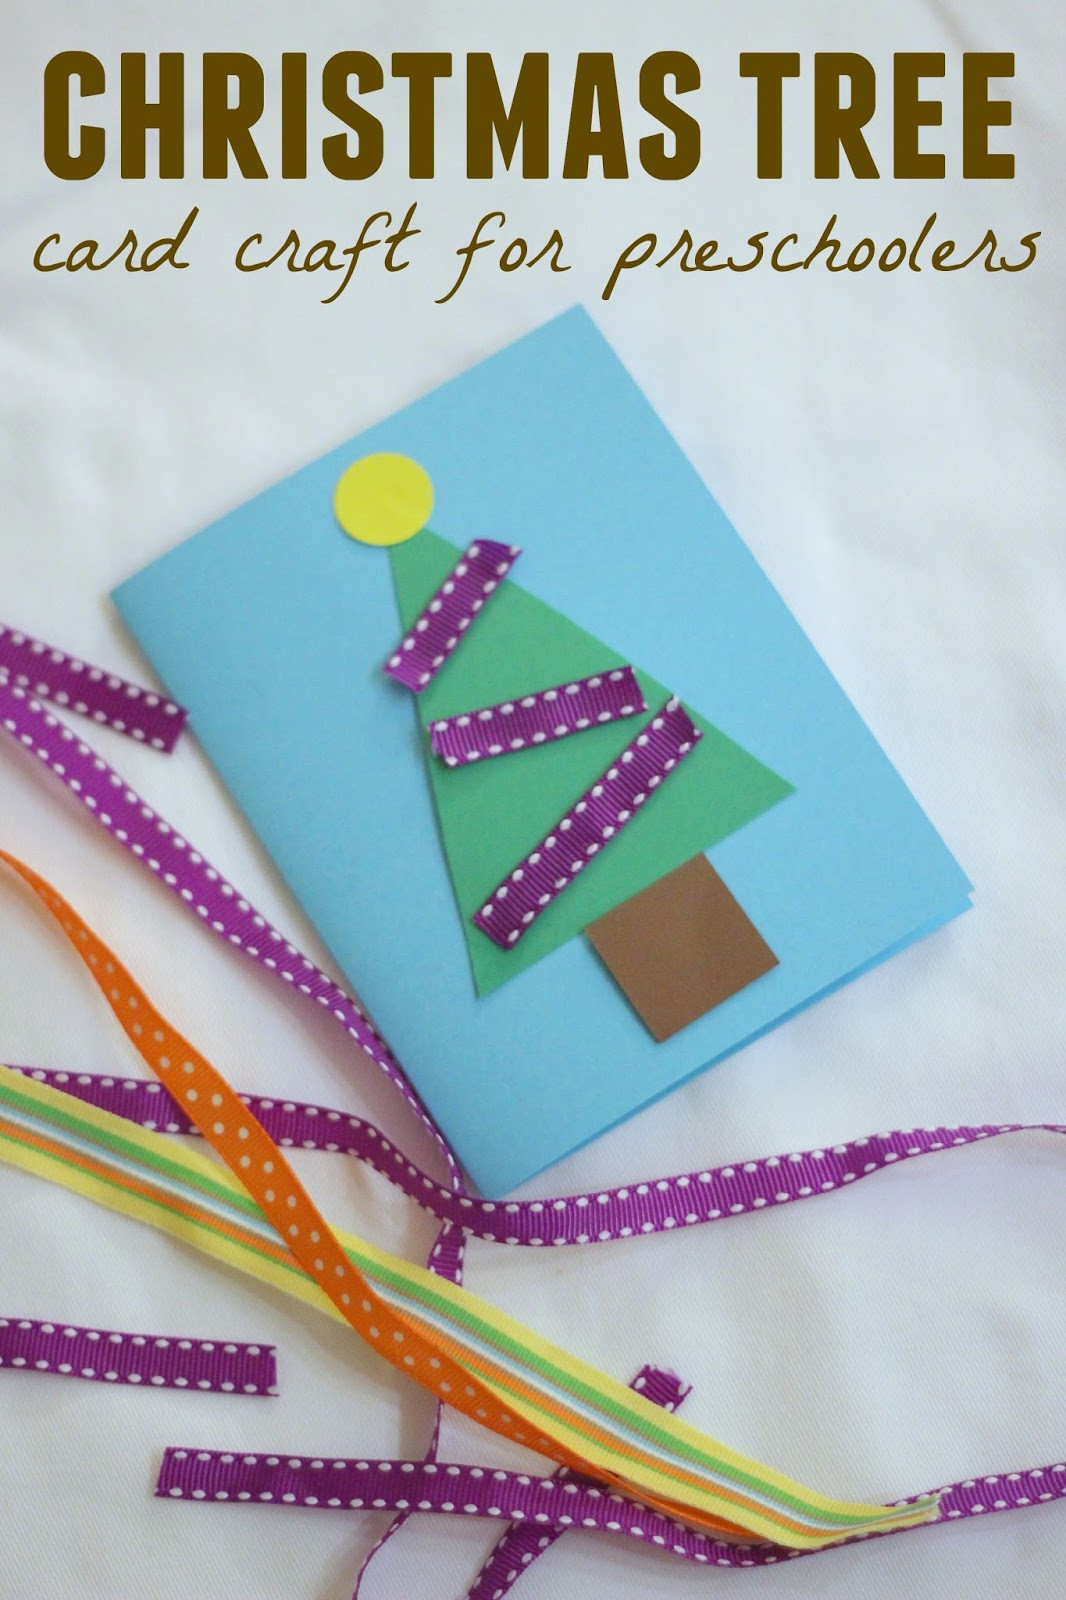 Craft For Preschoolers
 Toddler Approved Christmas Tree Card Craft for Preschoolers